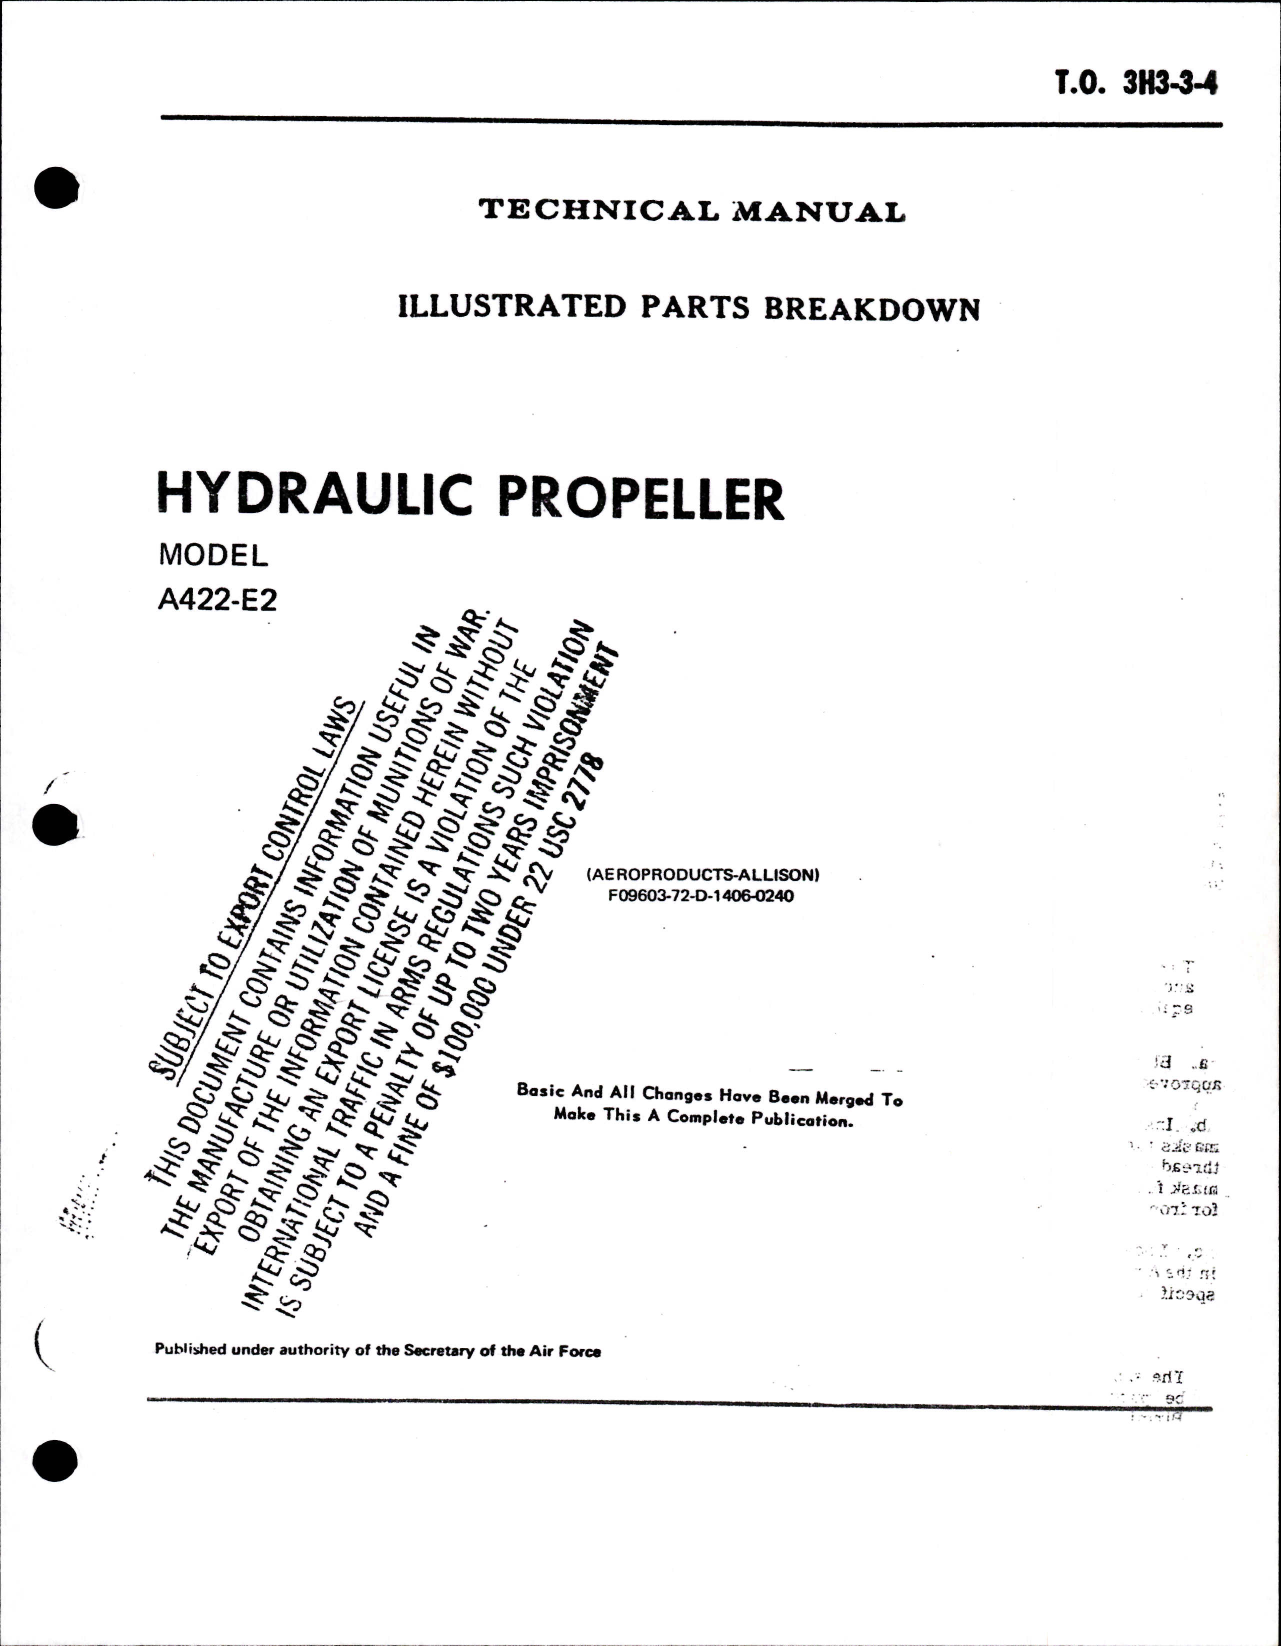 Sample page 1 from AirCorps Library document: Illustrated Parts Breakdown for Hydraulic Propeller Model A422-E2